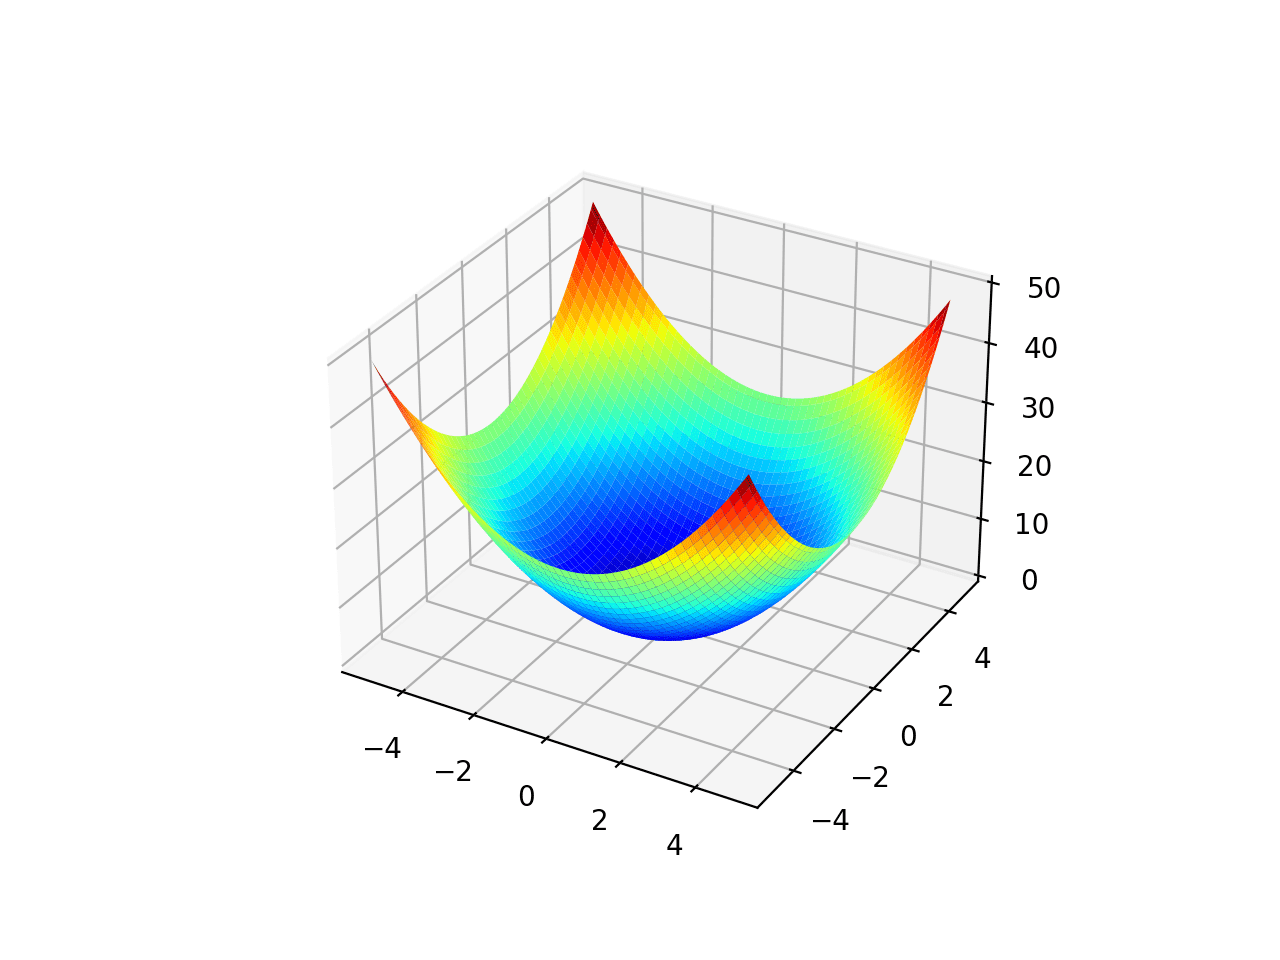 Surface Plot of a Two-Dimensional Objective Function